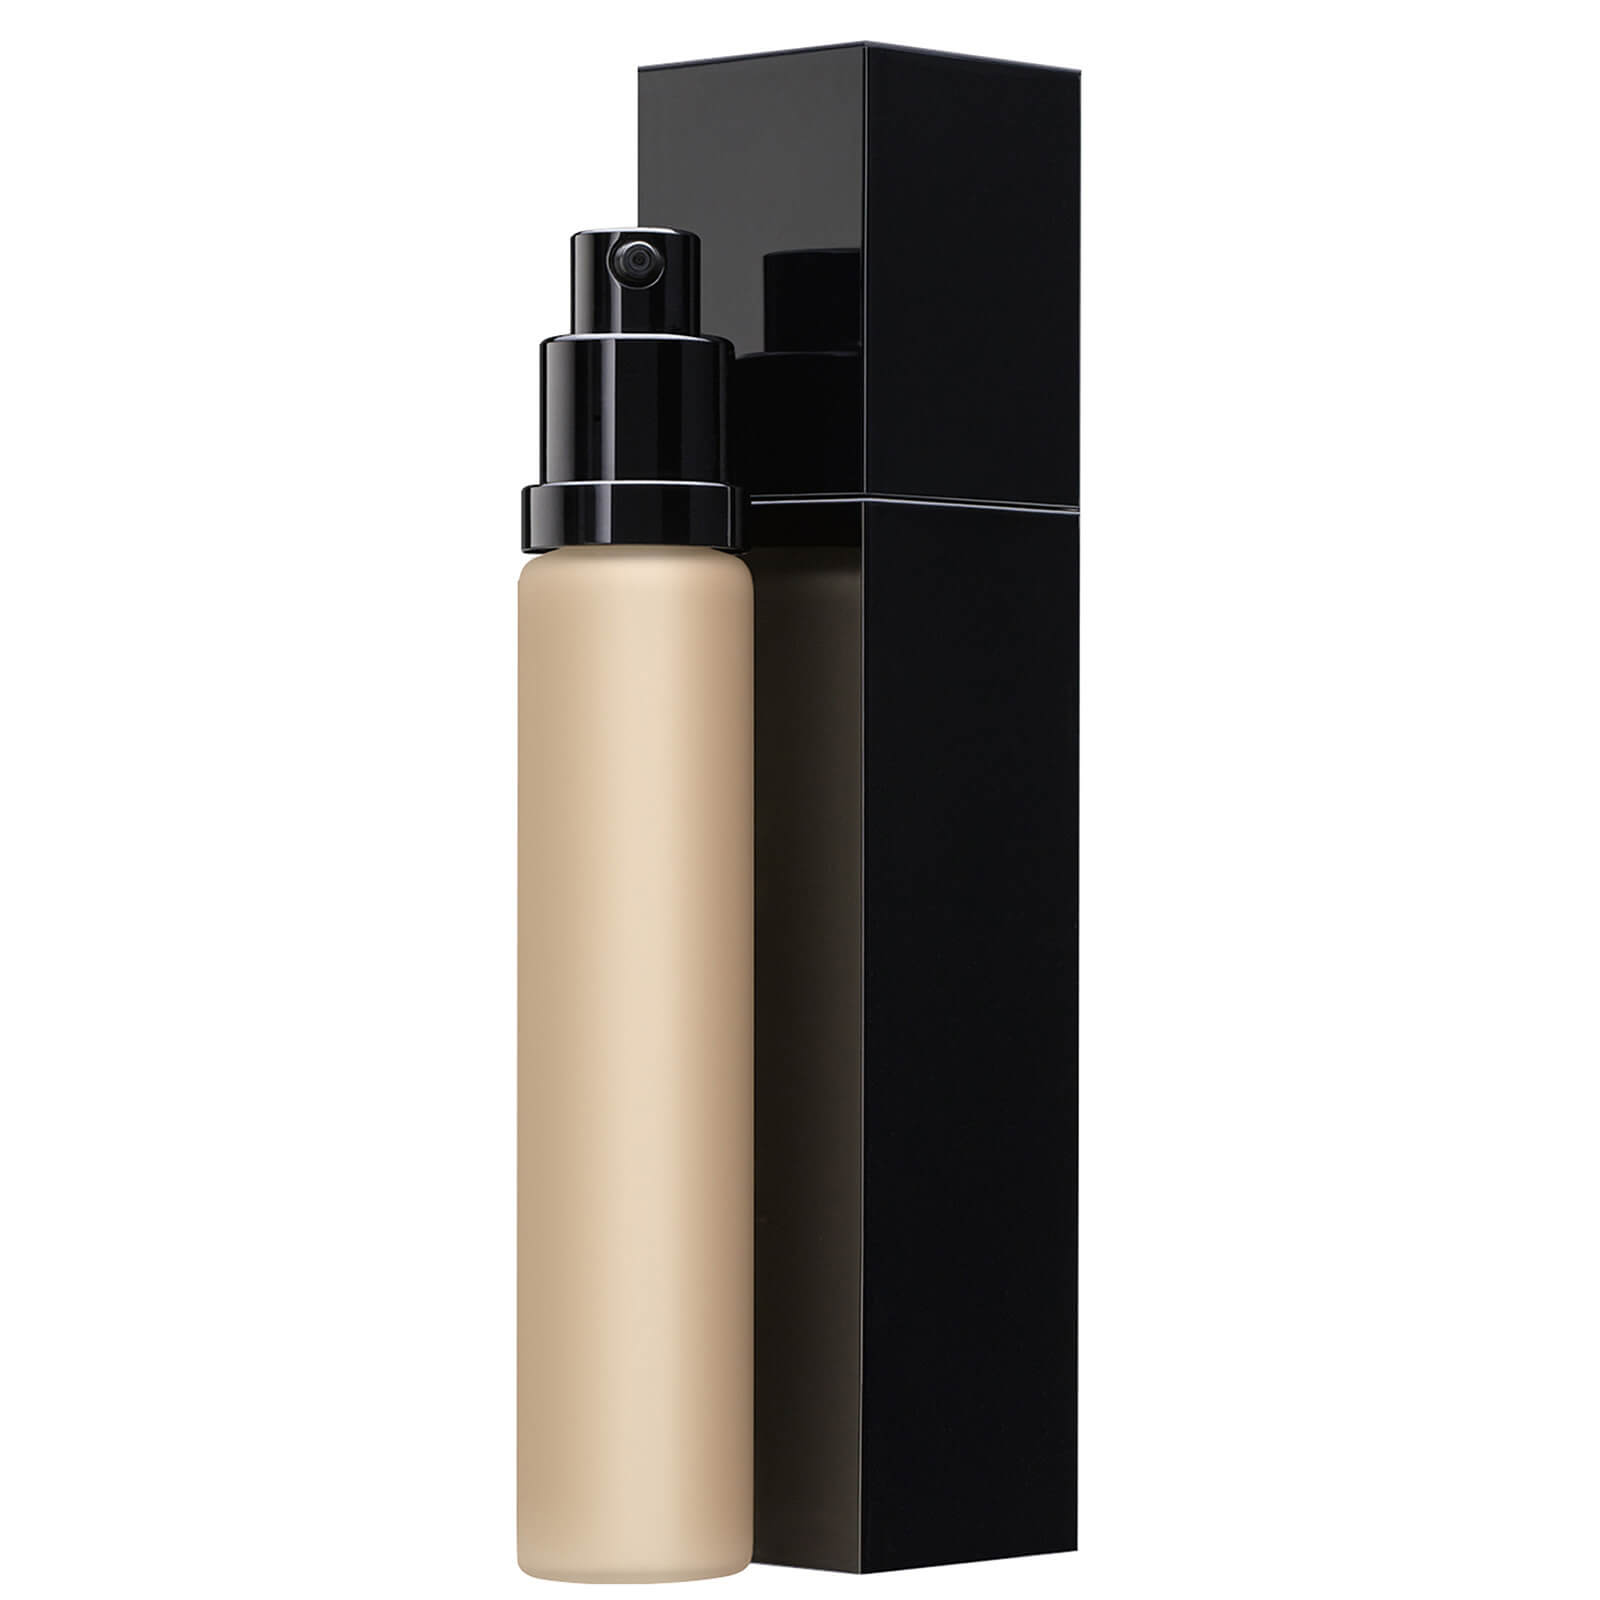 Serge Lutens Spectral Fluid Foundation 30ml (Various Shades) - I10